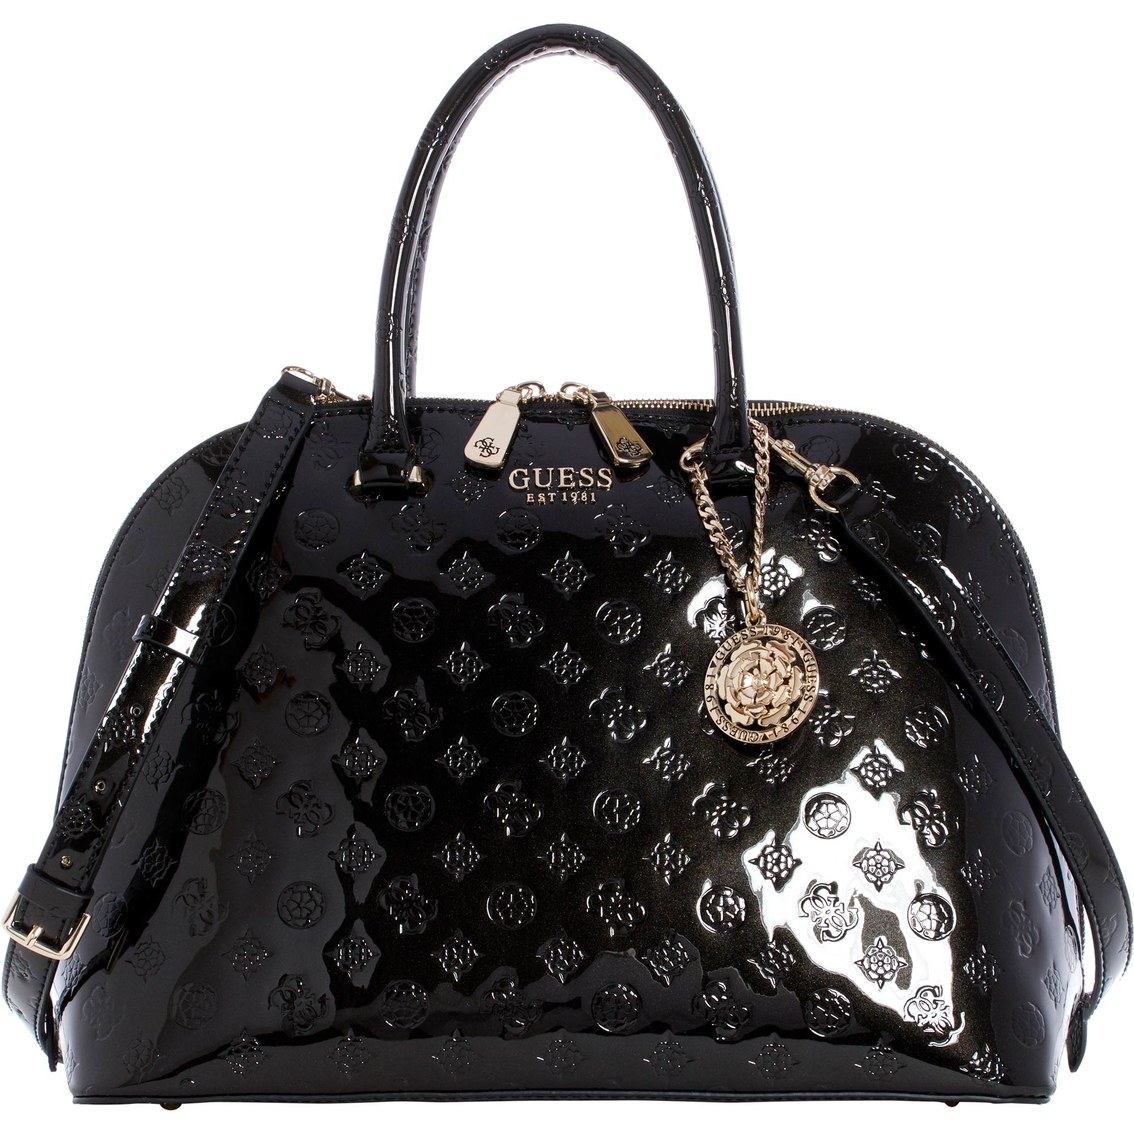 Guess Peony Dome Satchel | Satchels & Carryalls | Clothing ...